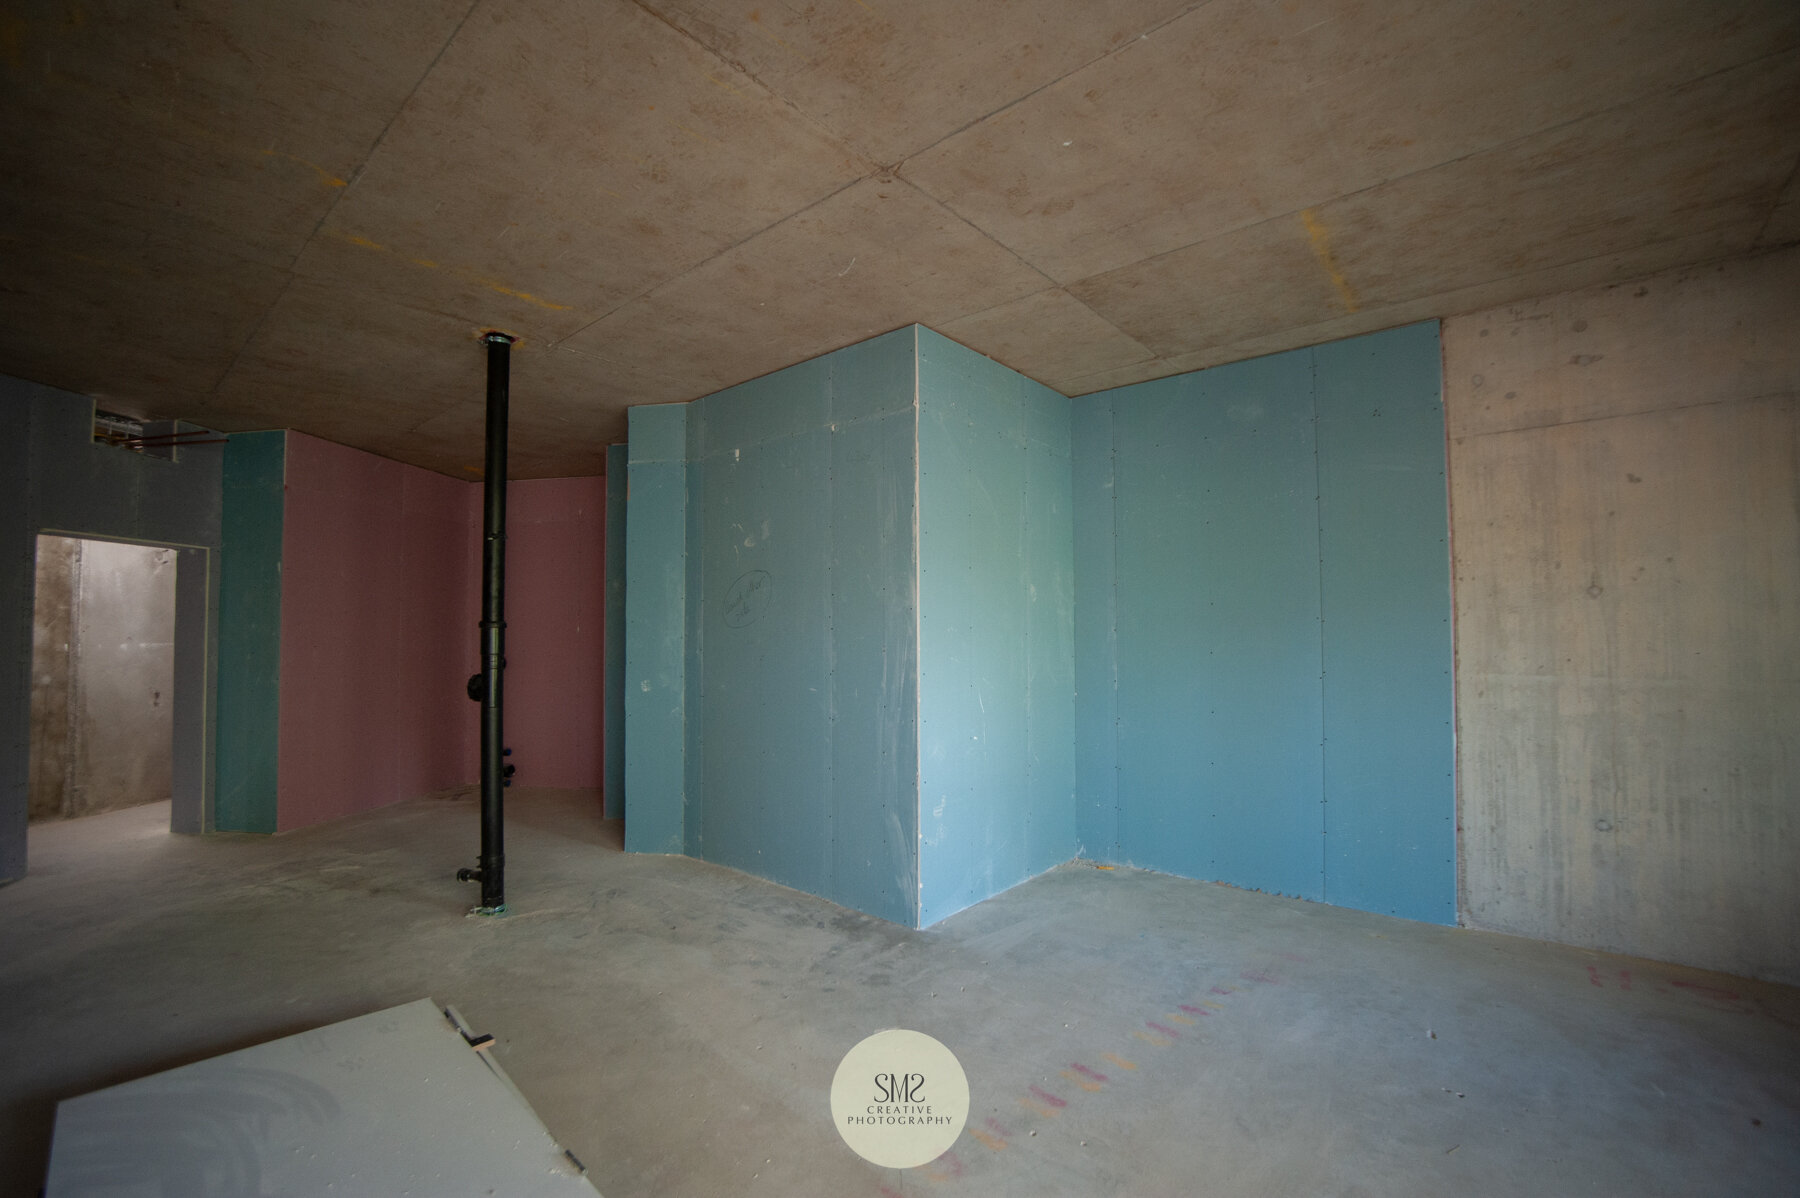  The different colours of the fireproofed plasterboard represent different purposes. The plasterboard that is grey on both sides is fixed to the walls where the front doors are and are reinforced to prevent forced entry. 